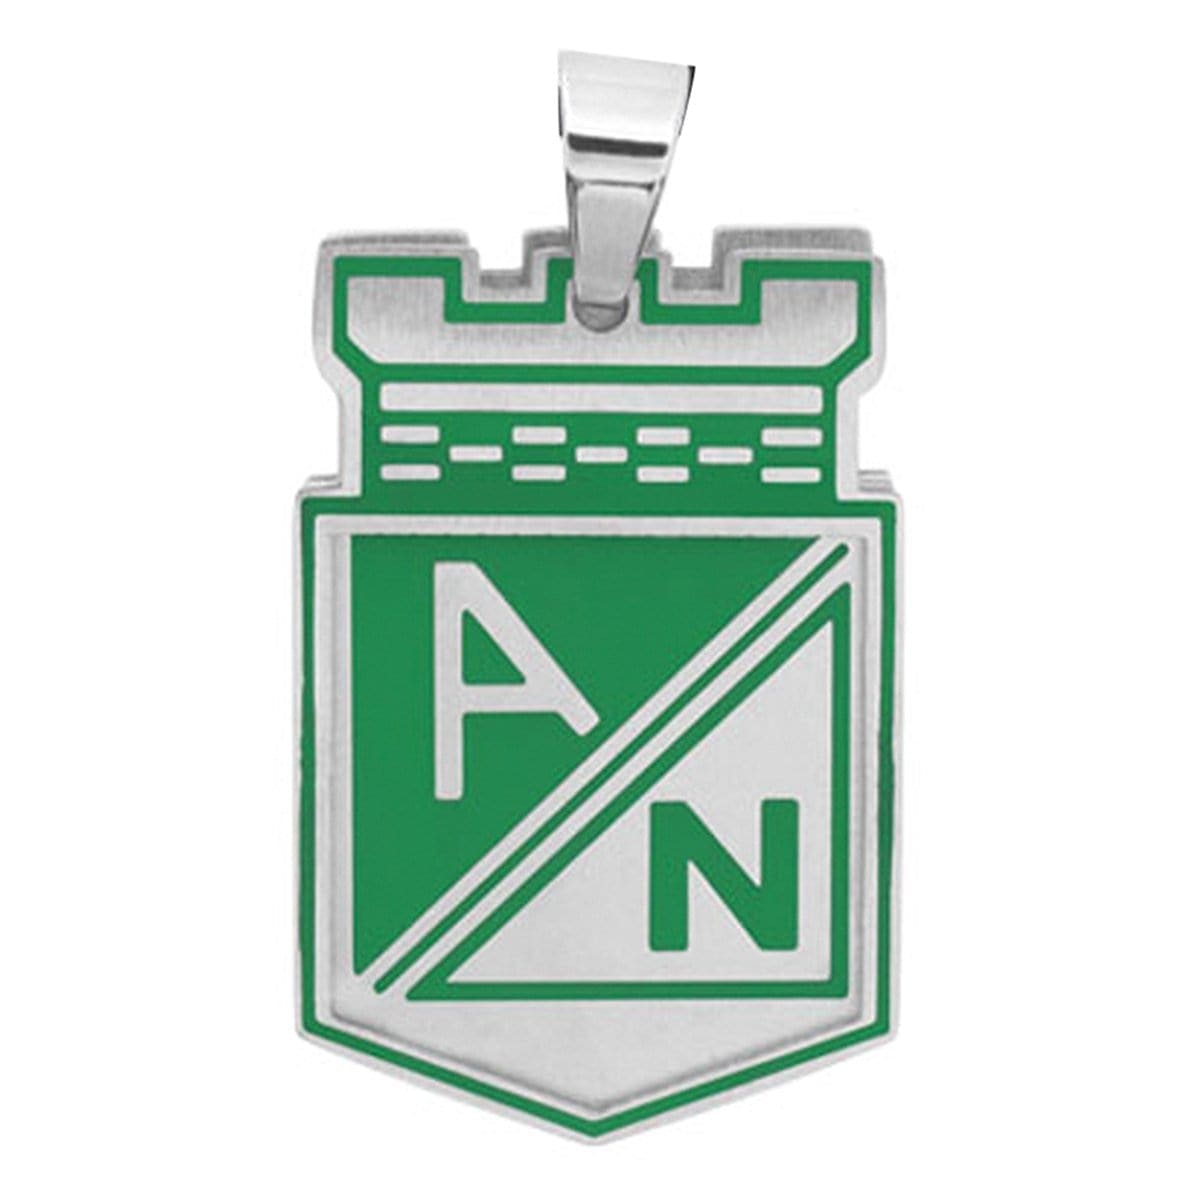 INOX JEWELRY Pendants Green and Silver Tone Stainless Steel Columbian Football Team Small Cut-Out Pendant SLSSP4463